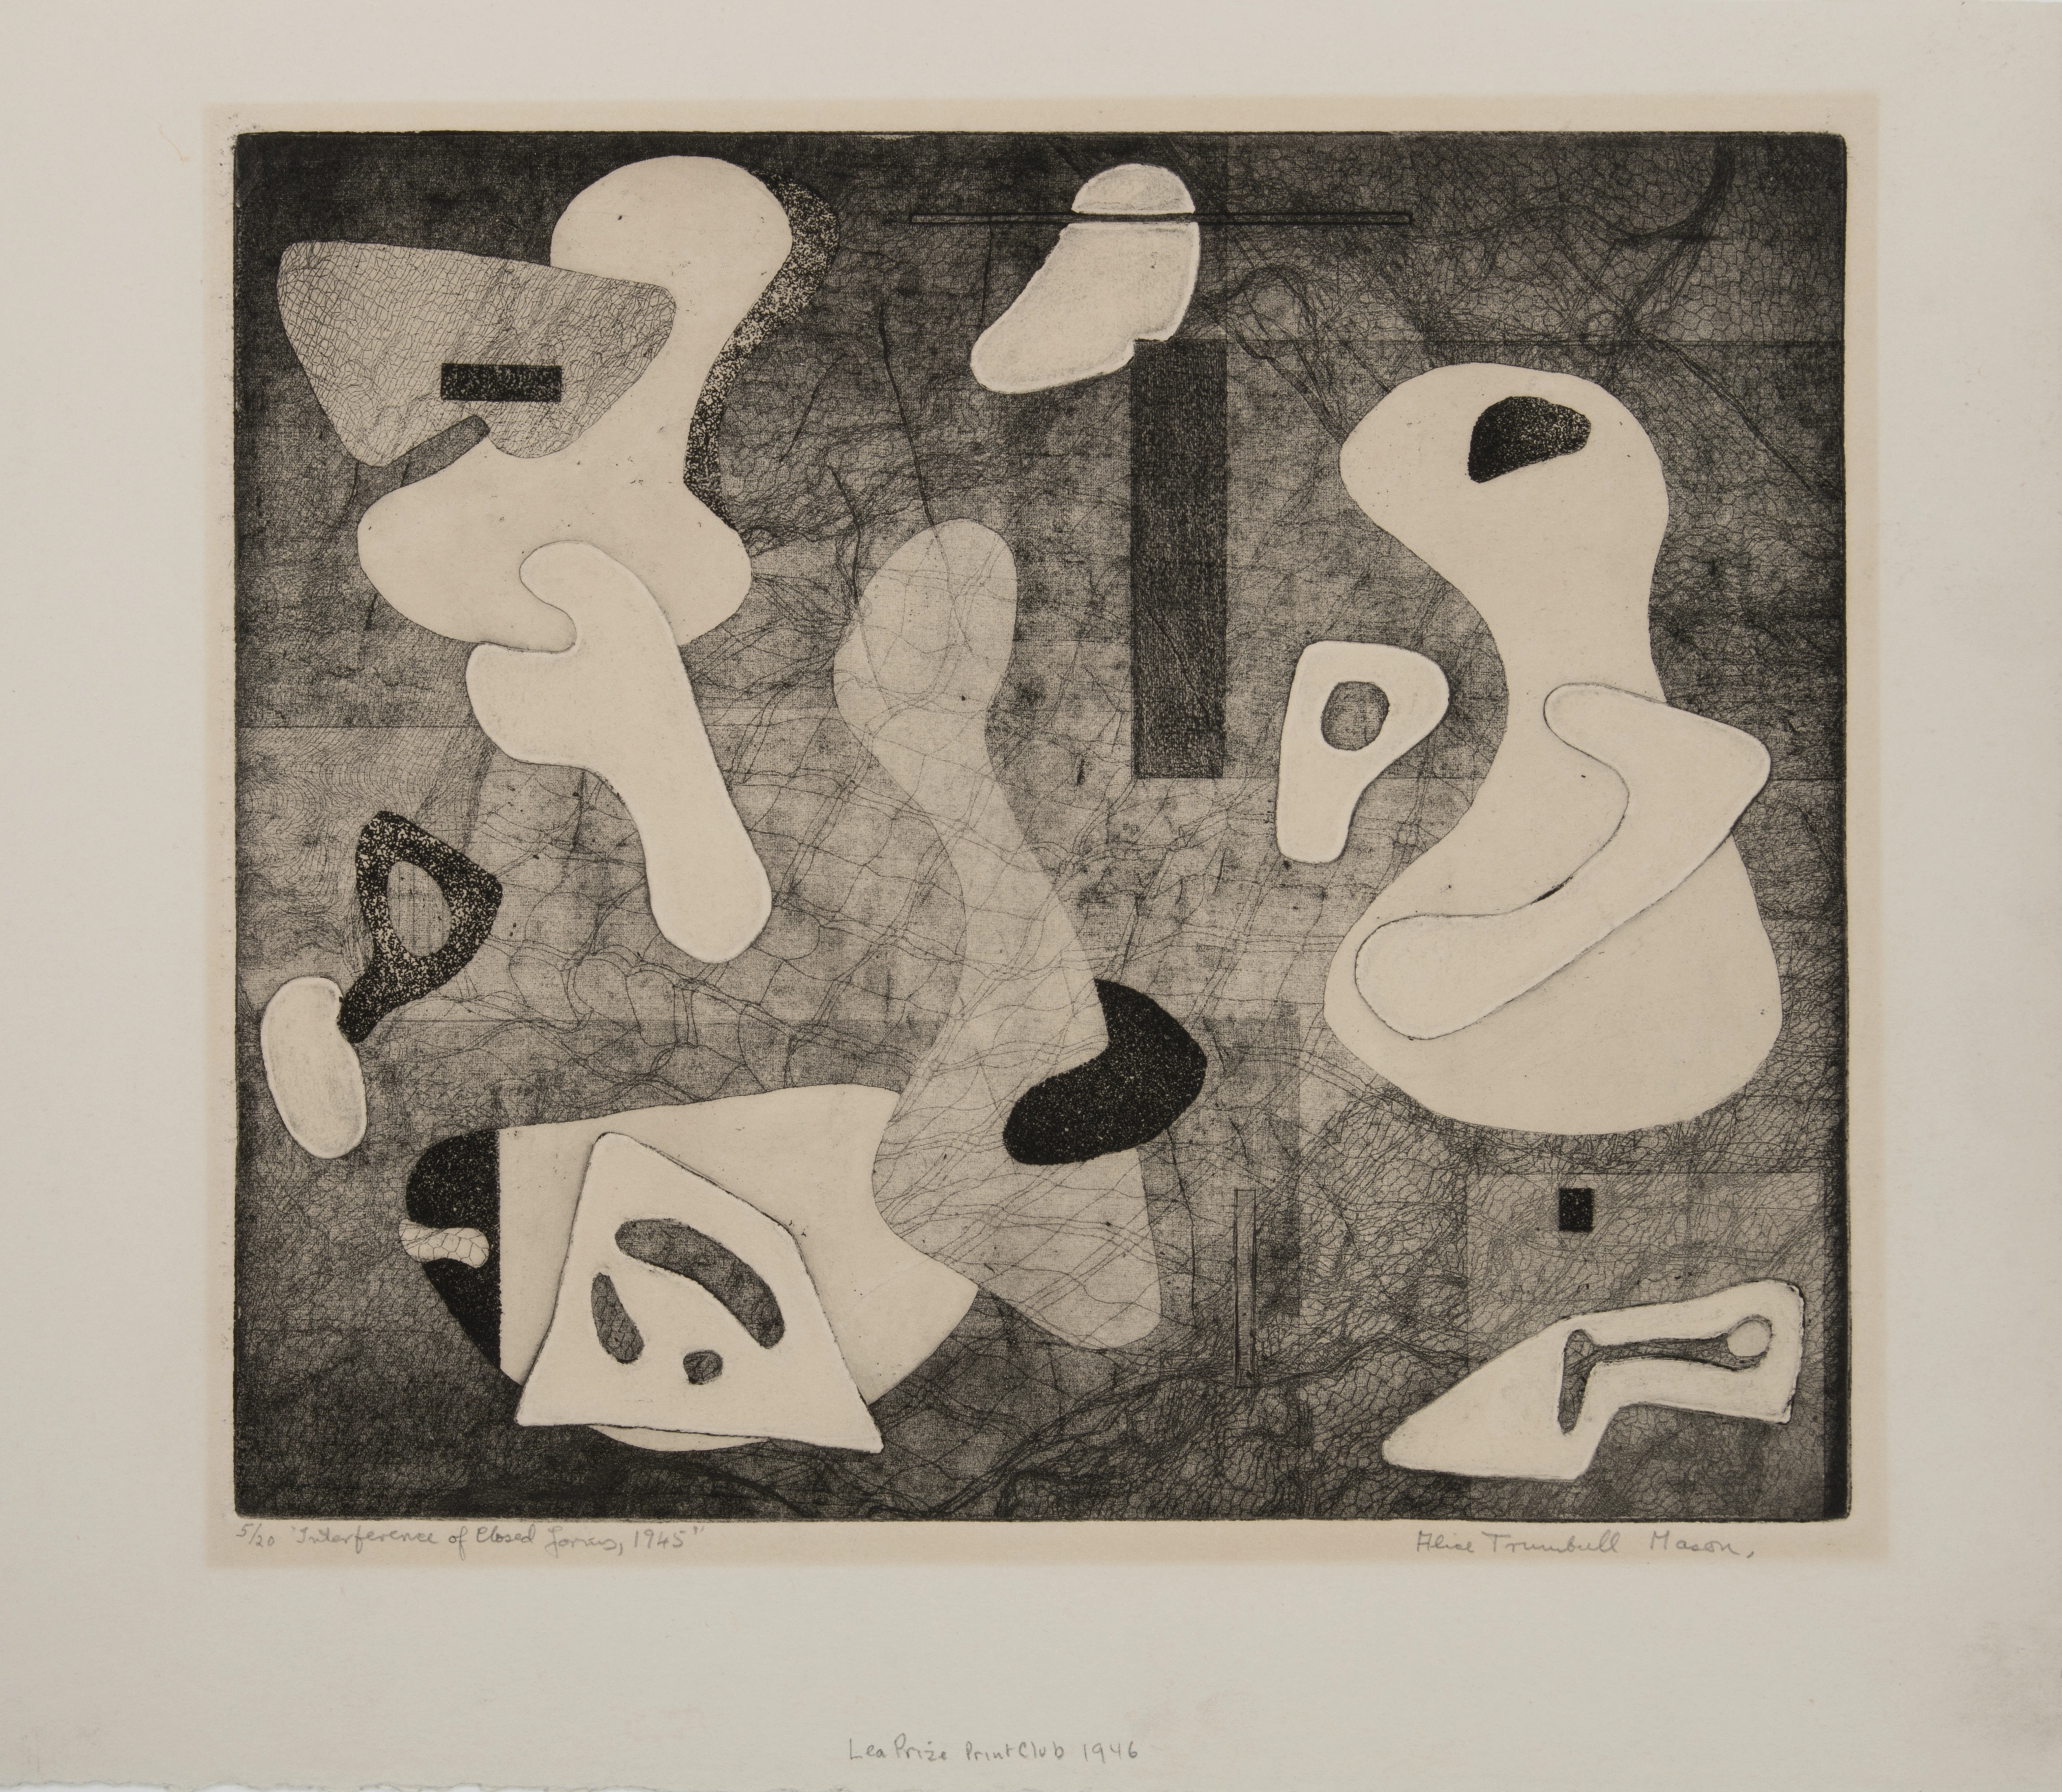 Etching on paper of biomorphic forms, created using white and various grey tones. The background has a net-like quality to the surface/line work.